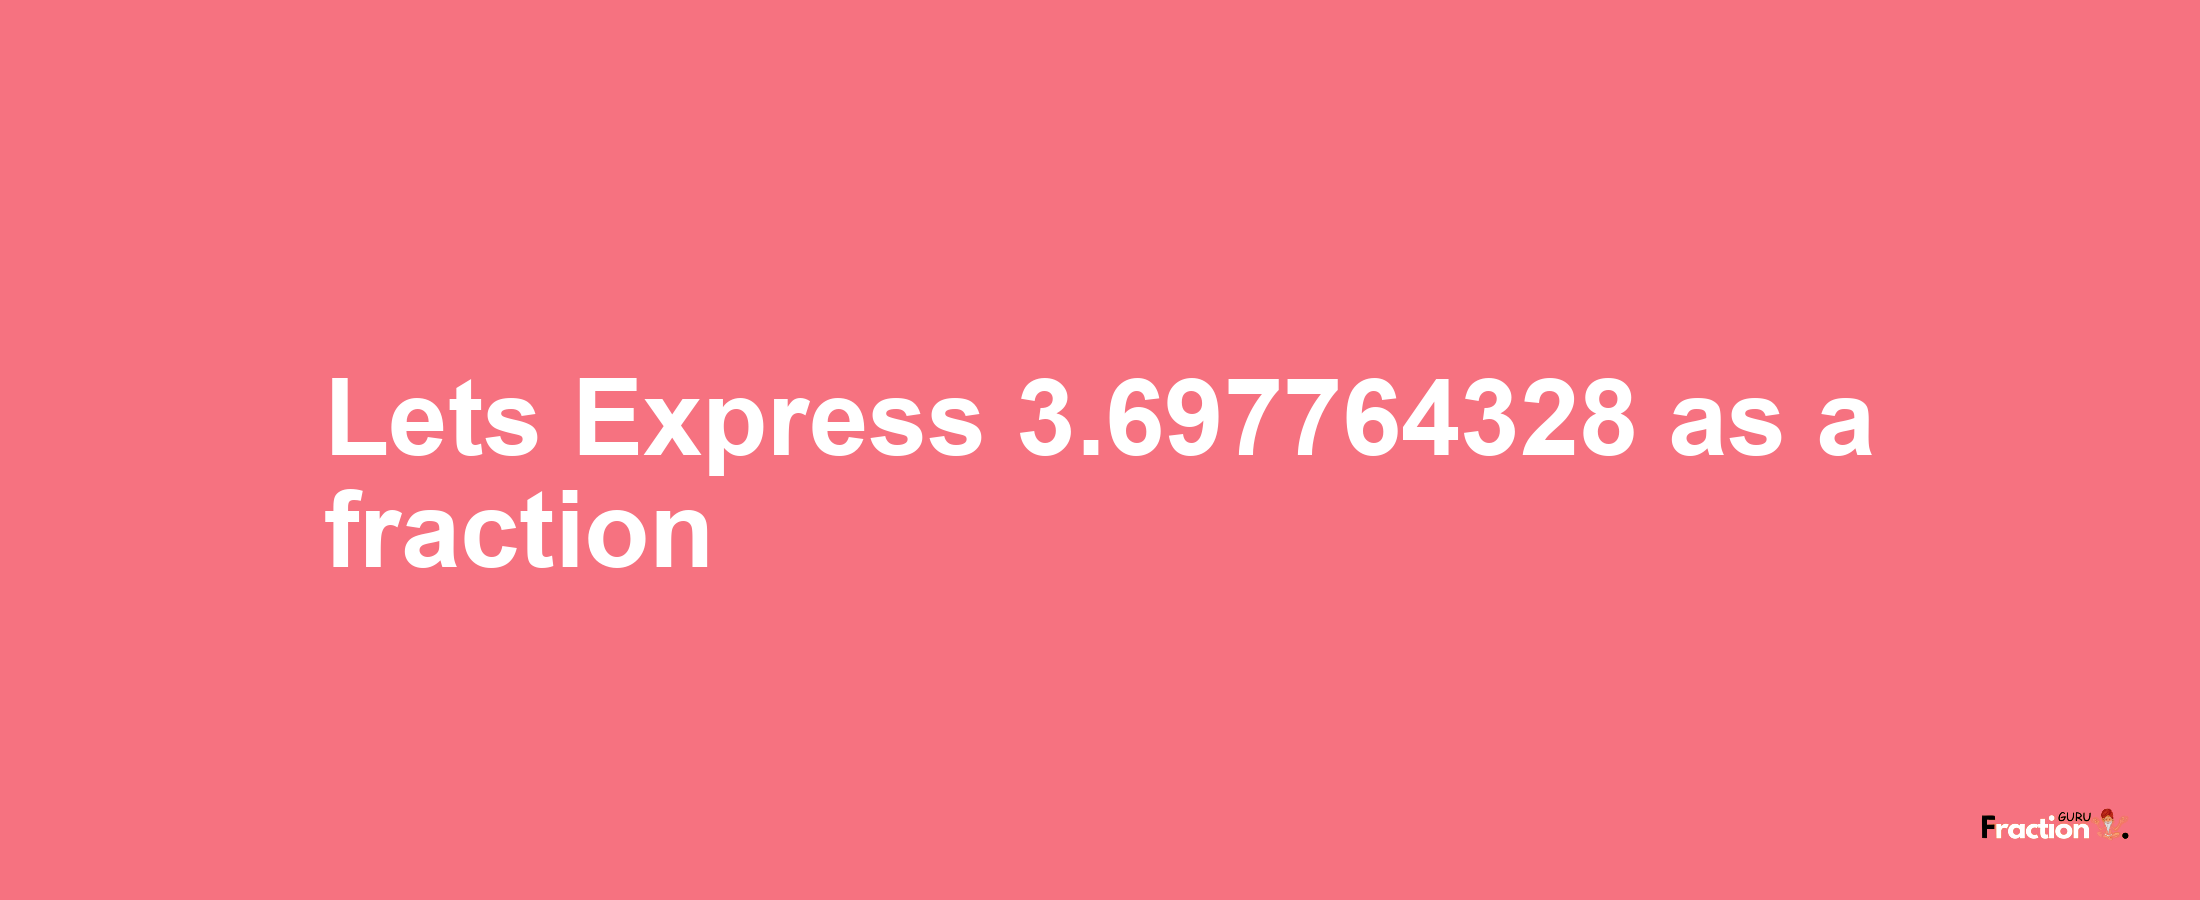 Lets Express 3.697764328 as afraction